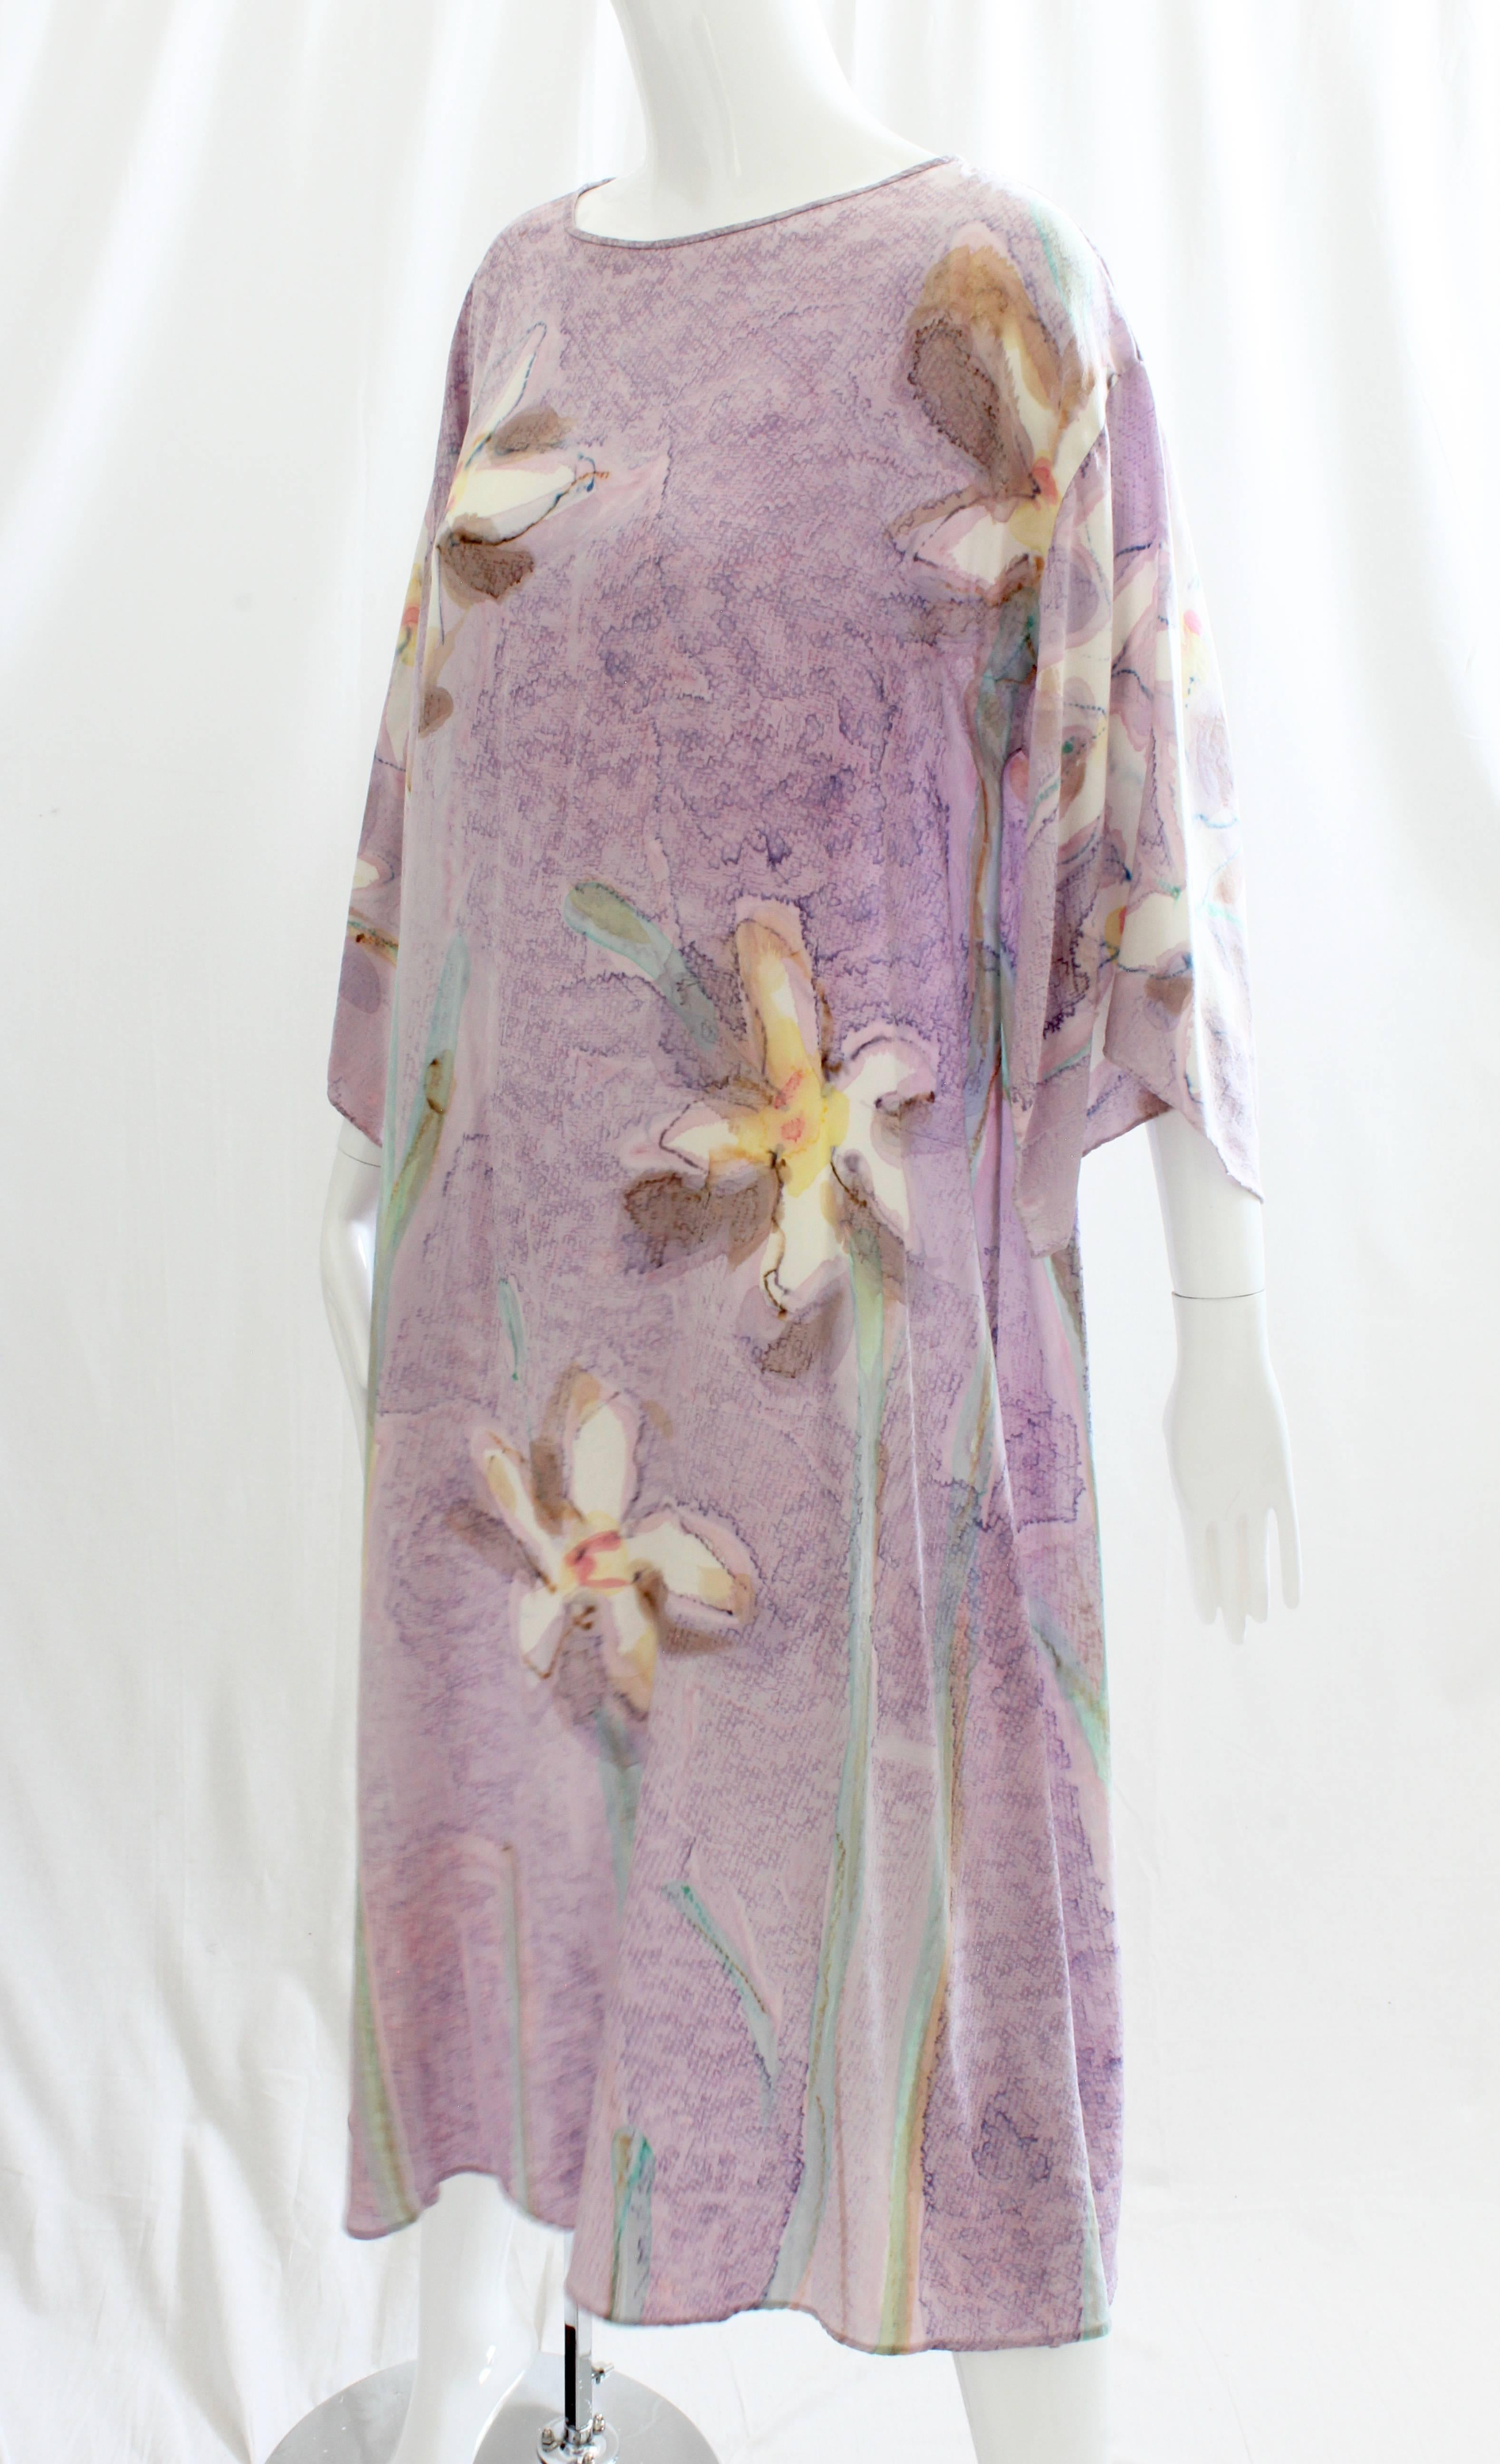 This pretty kaftan or caftan dress was made by David Stiffly for Elizabeth Arden The Salon, likely in the early 1980s. Made from what we believe is silk (no content tag), it features gorgeous watercolor florals against a pale lilac background.